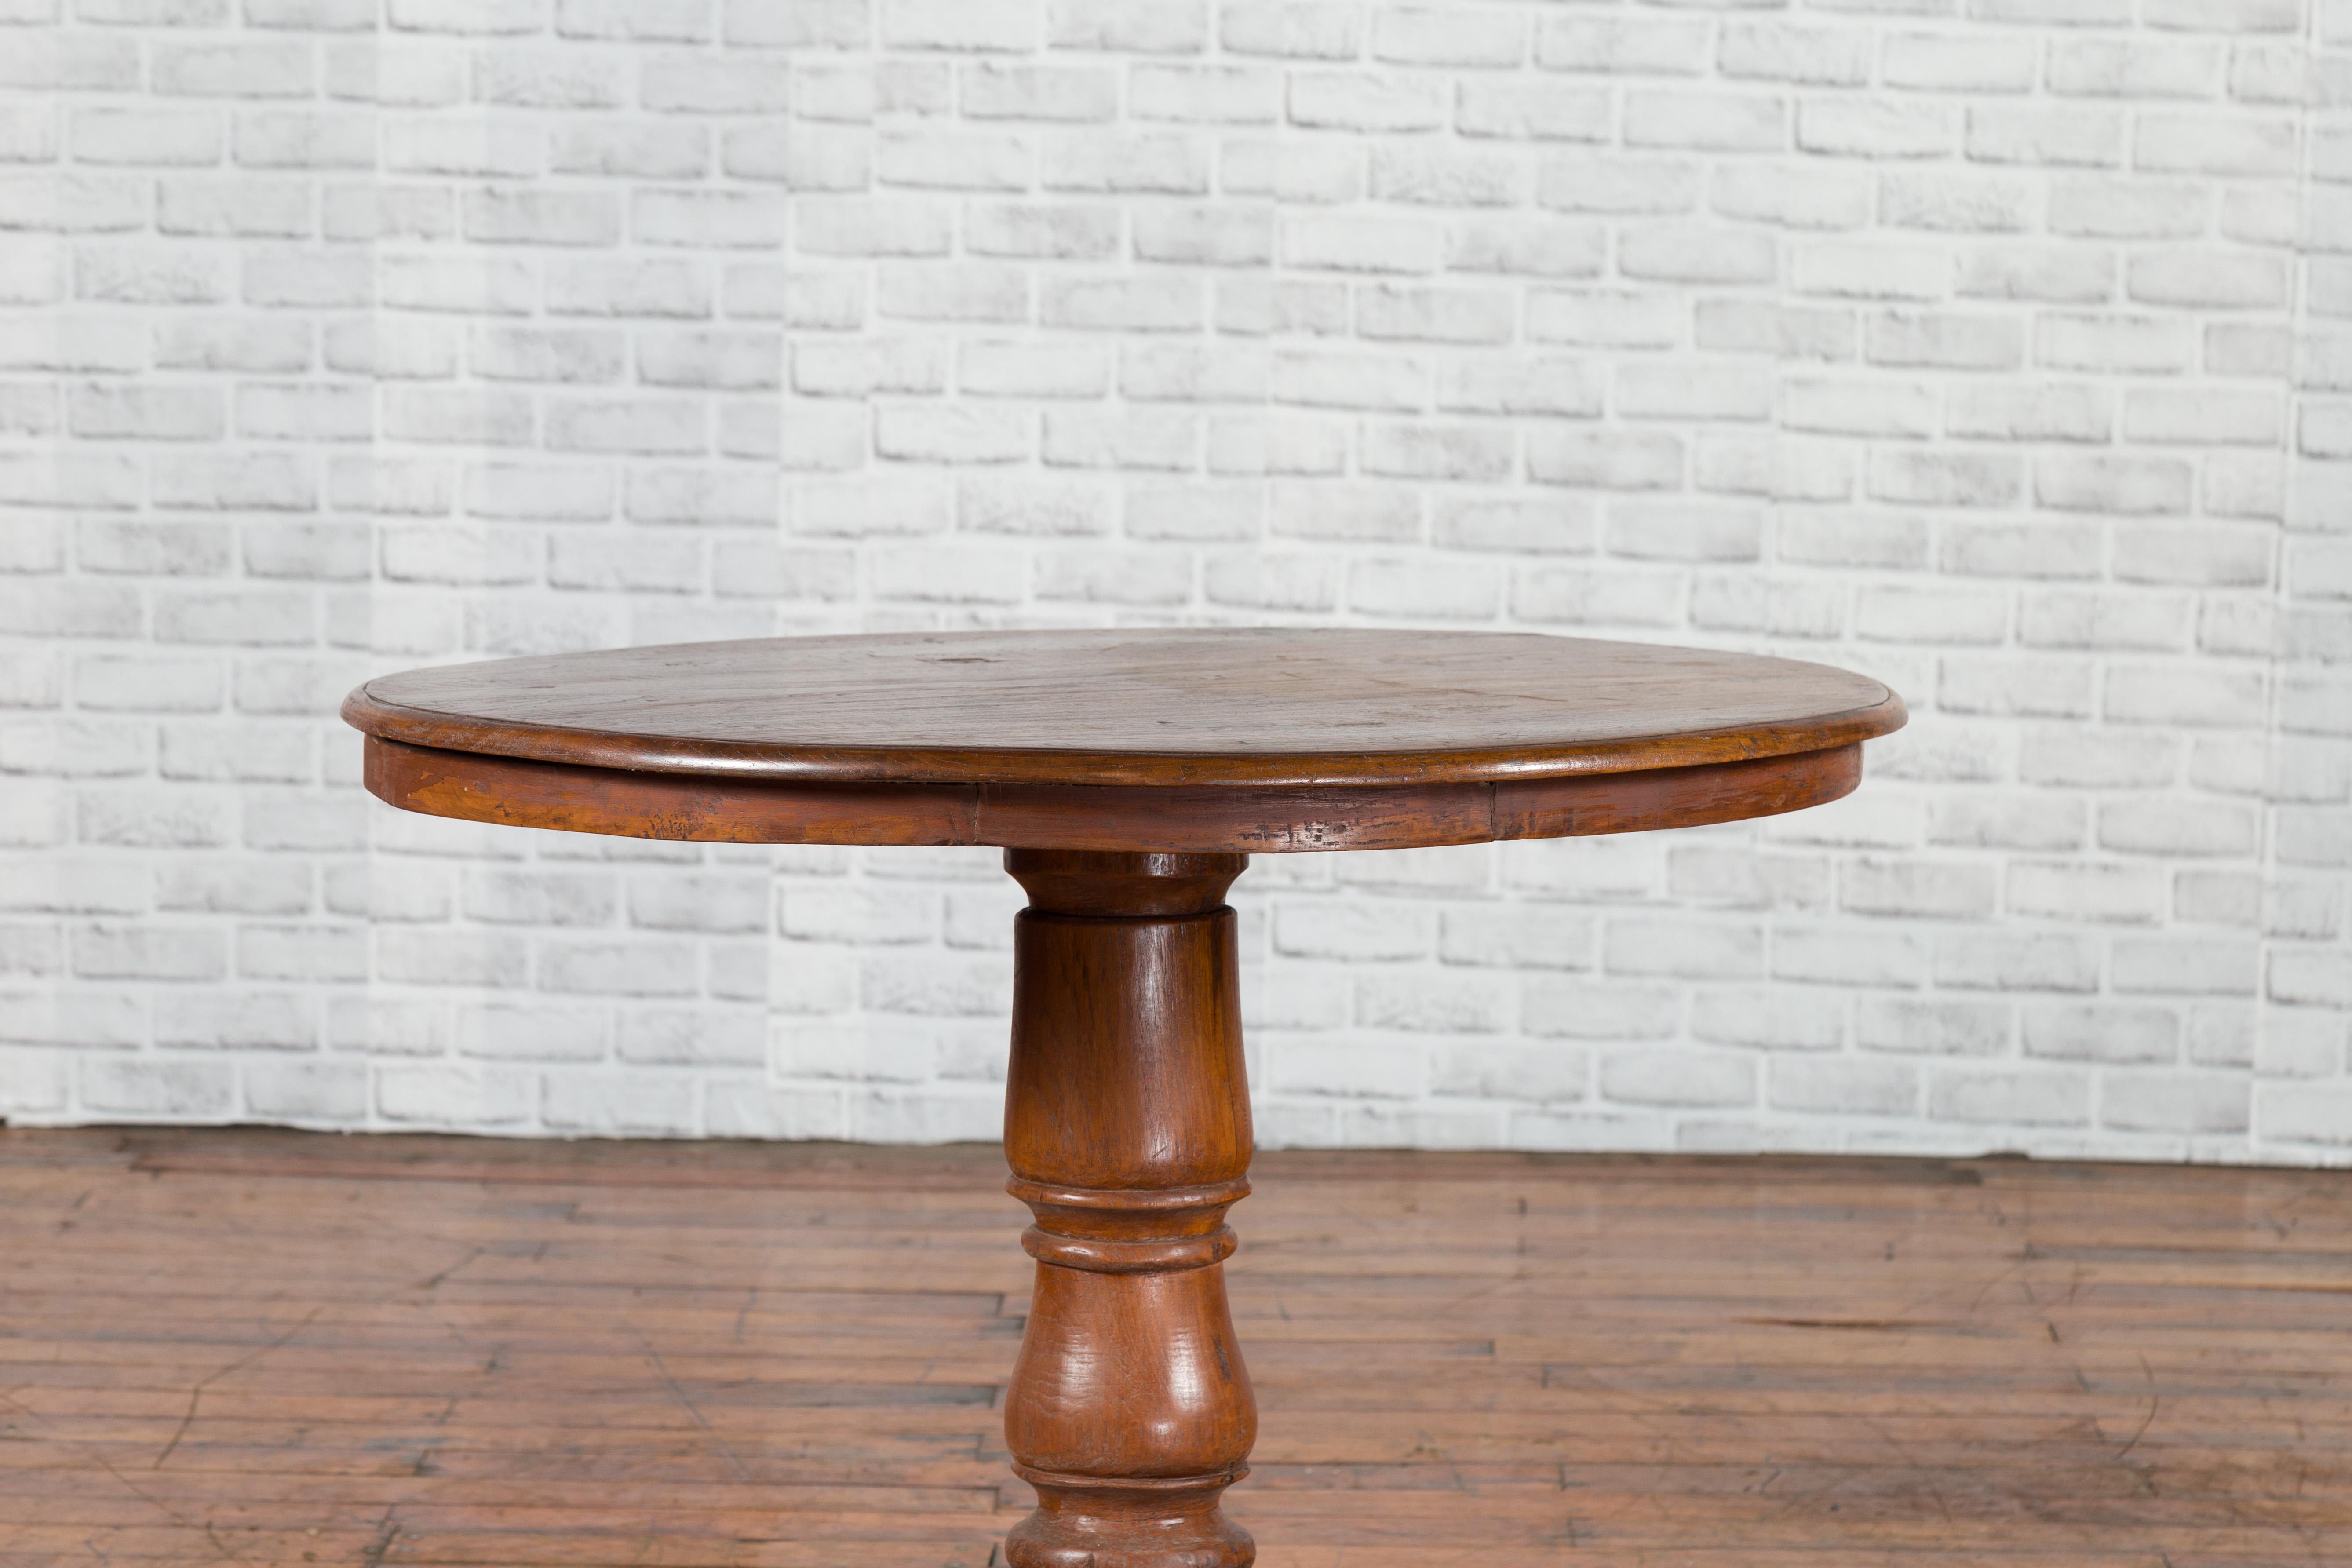 Vintage Dutch Colonial Indonesian Round Top Pedestal Table with Tripod Base For Sale 4